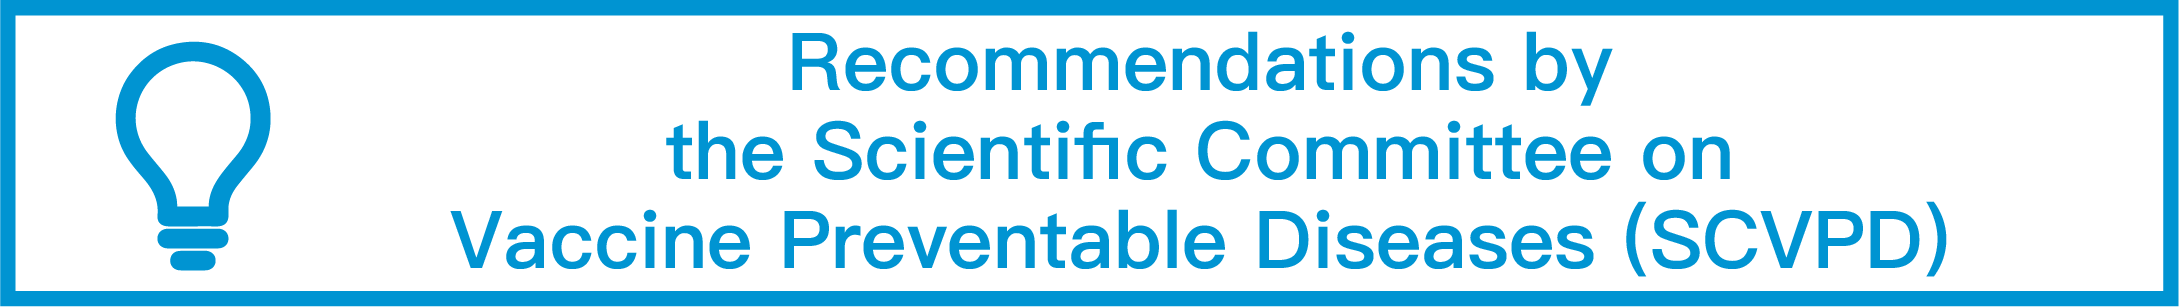 Recommendations by the Scientific Committee on Vaccine Preventable Diseases